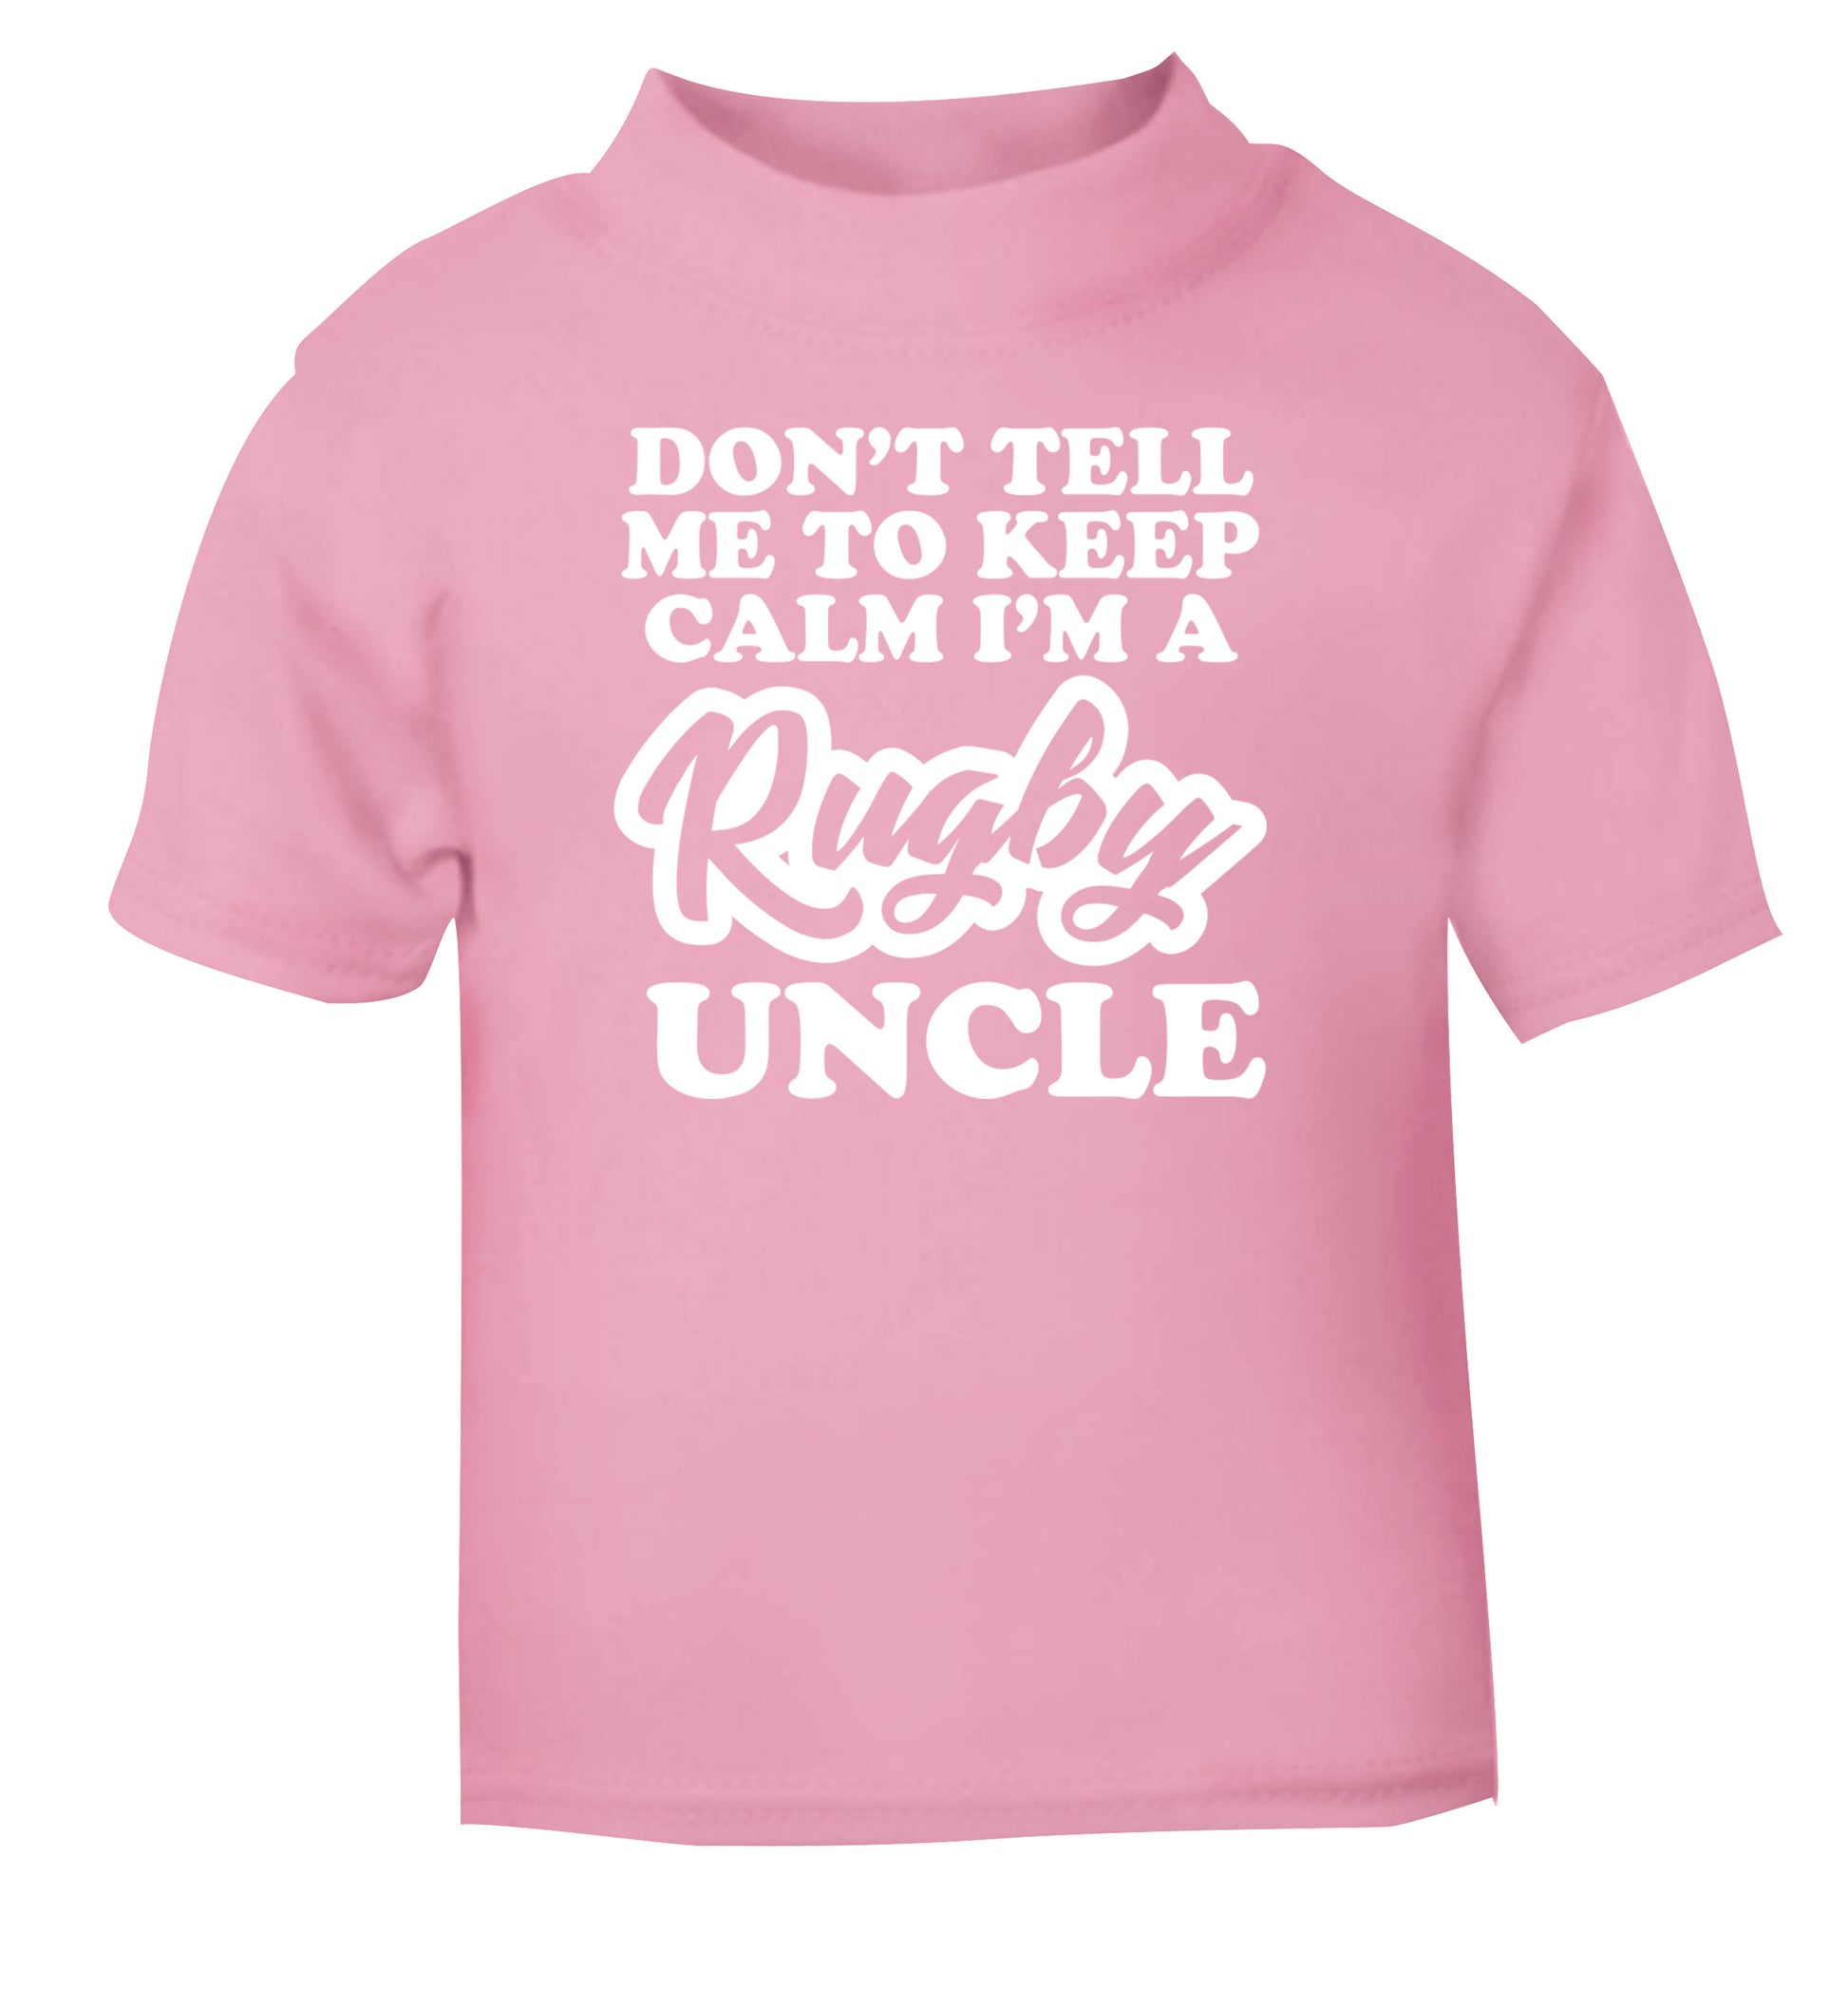 Don't tell me to keep calm I'm a rugby uncle light pink Baby Toddler Tshirt 2 Years